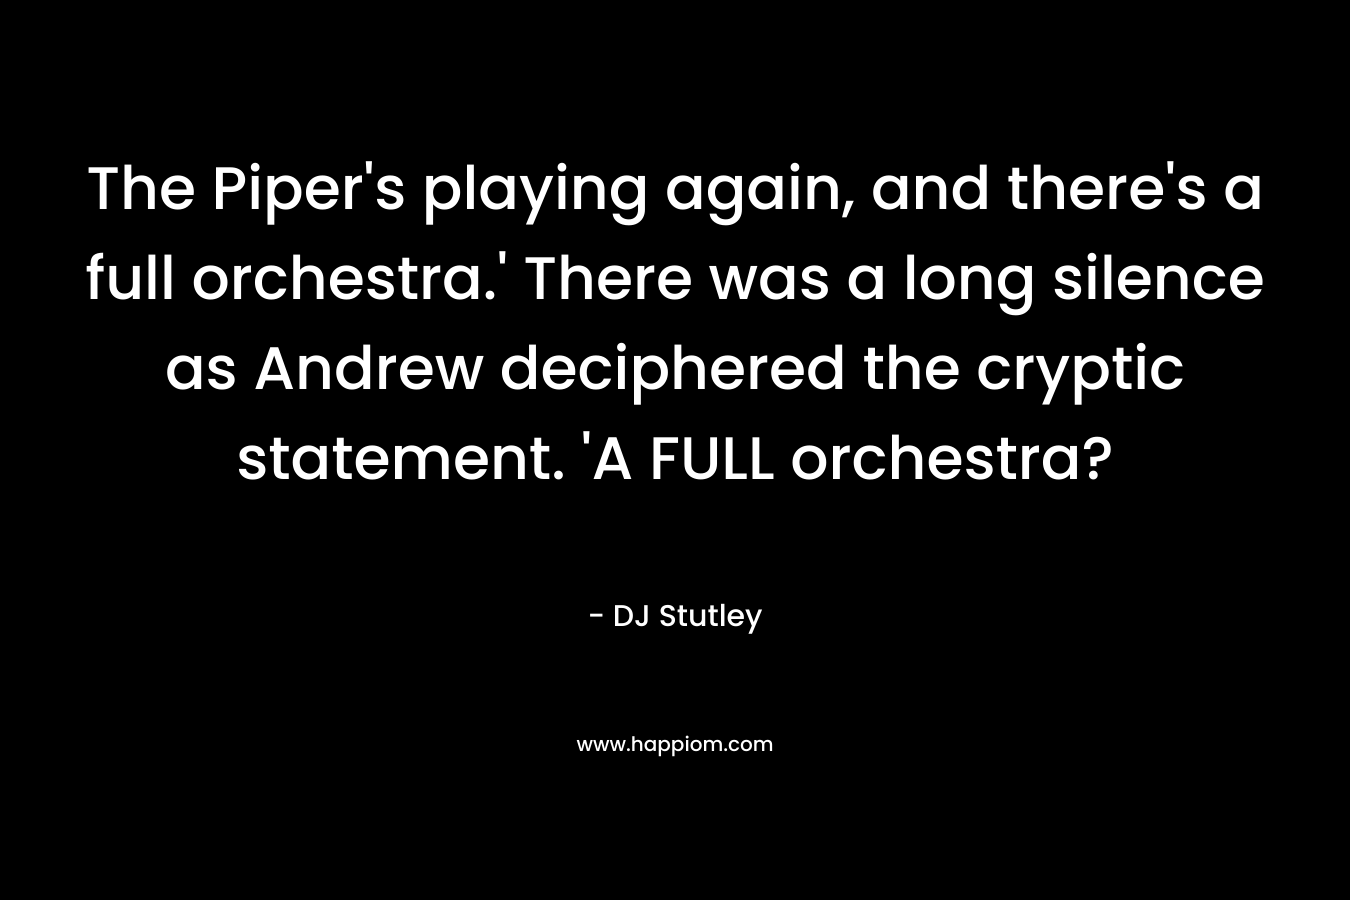 The Piper's playing again, and there's a full orchestra.' There was a long silence as Andrew deciphered the cryptic statement. 'A FULL orchestra?